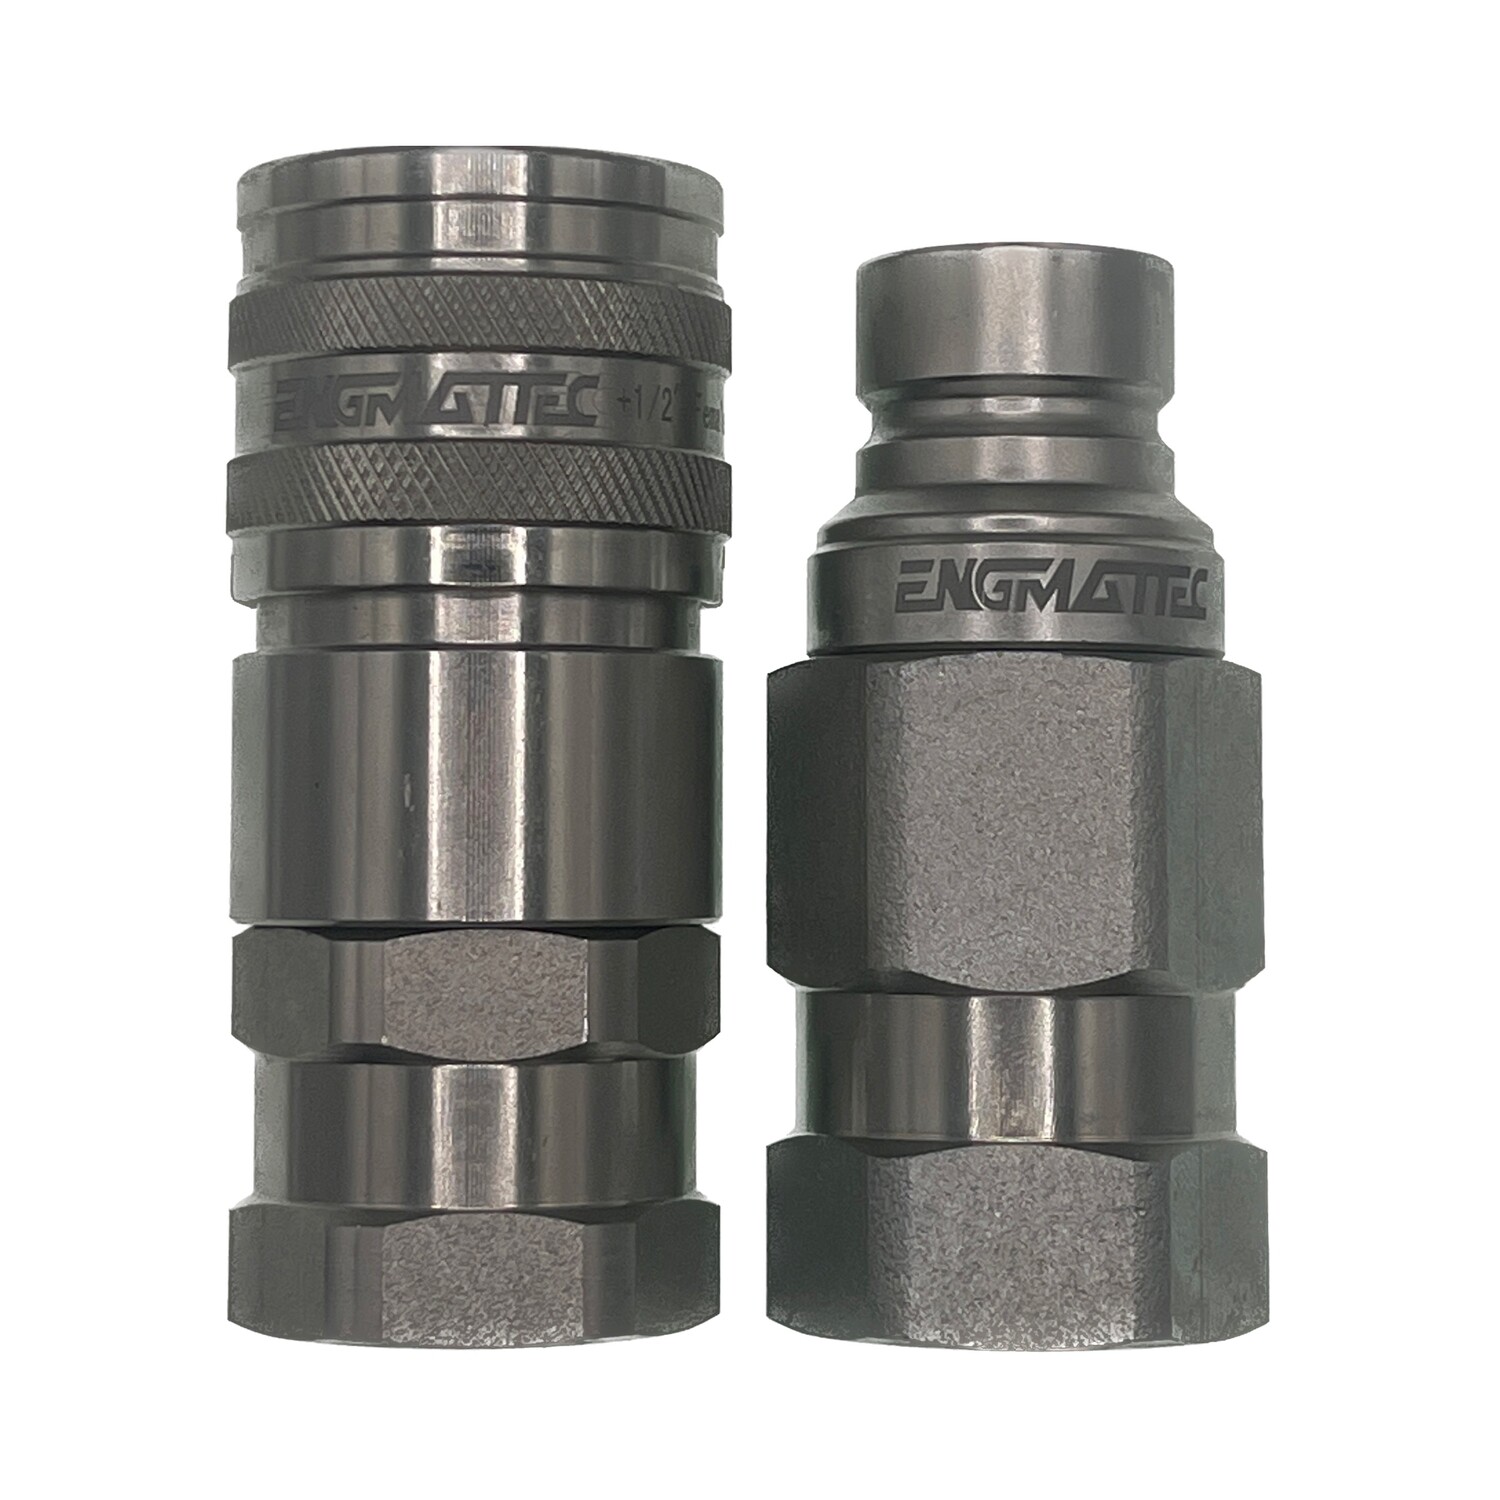 Pair of 1/2 body Quick-connect Flat Face hydraulic couplers with 1-1/16